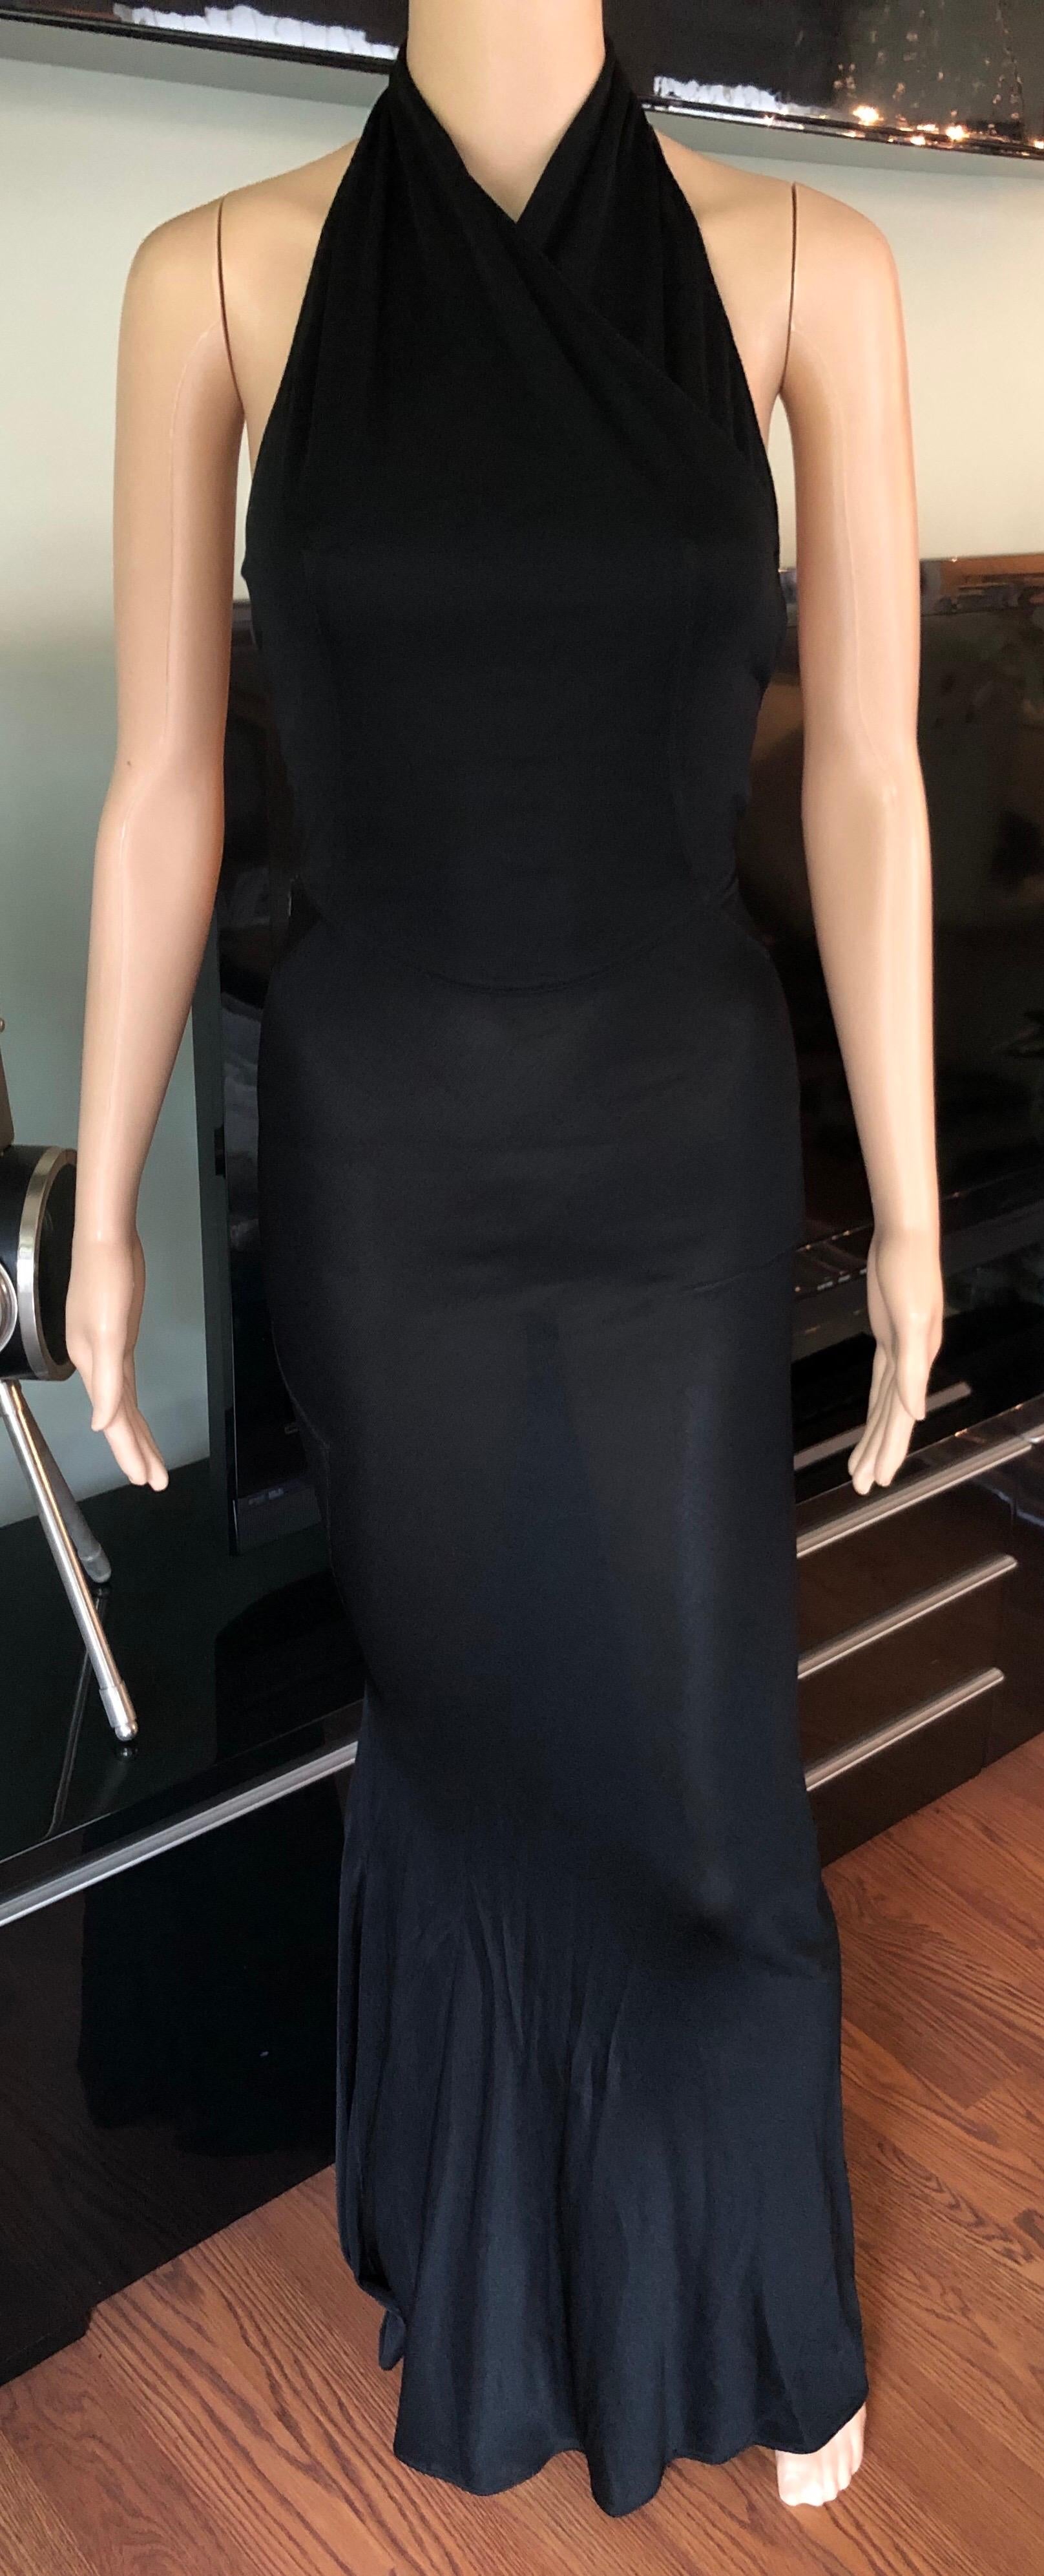 Azzedine Alaïa F/W 2001 Vintage Halter Backless Black Gown Maxi Dress In Good Condition For Sale In Naples, FL